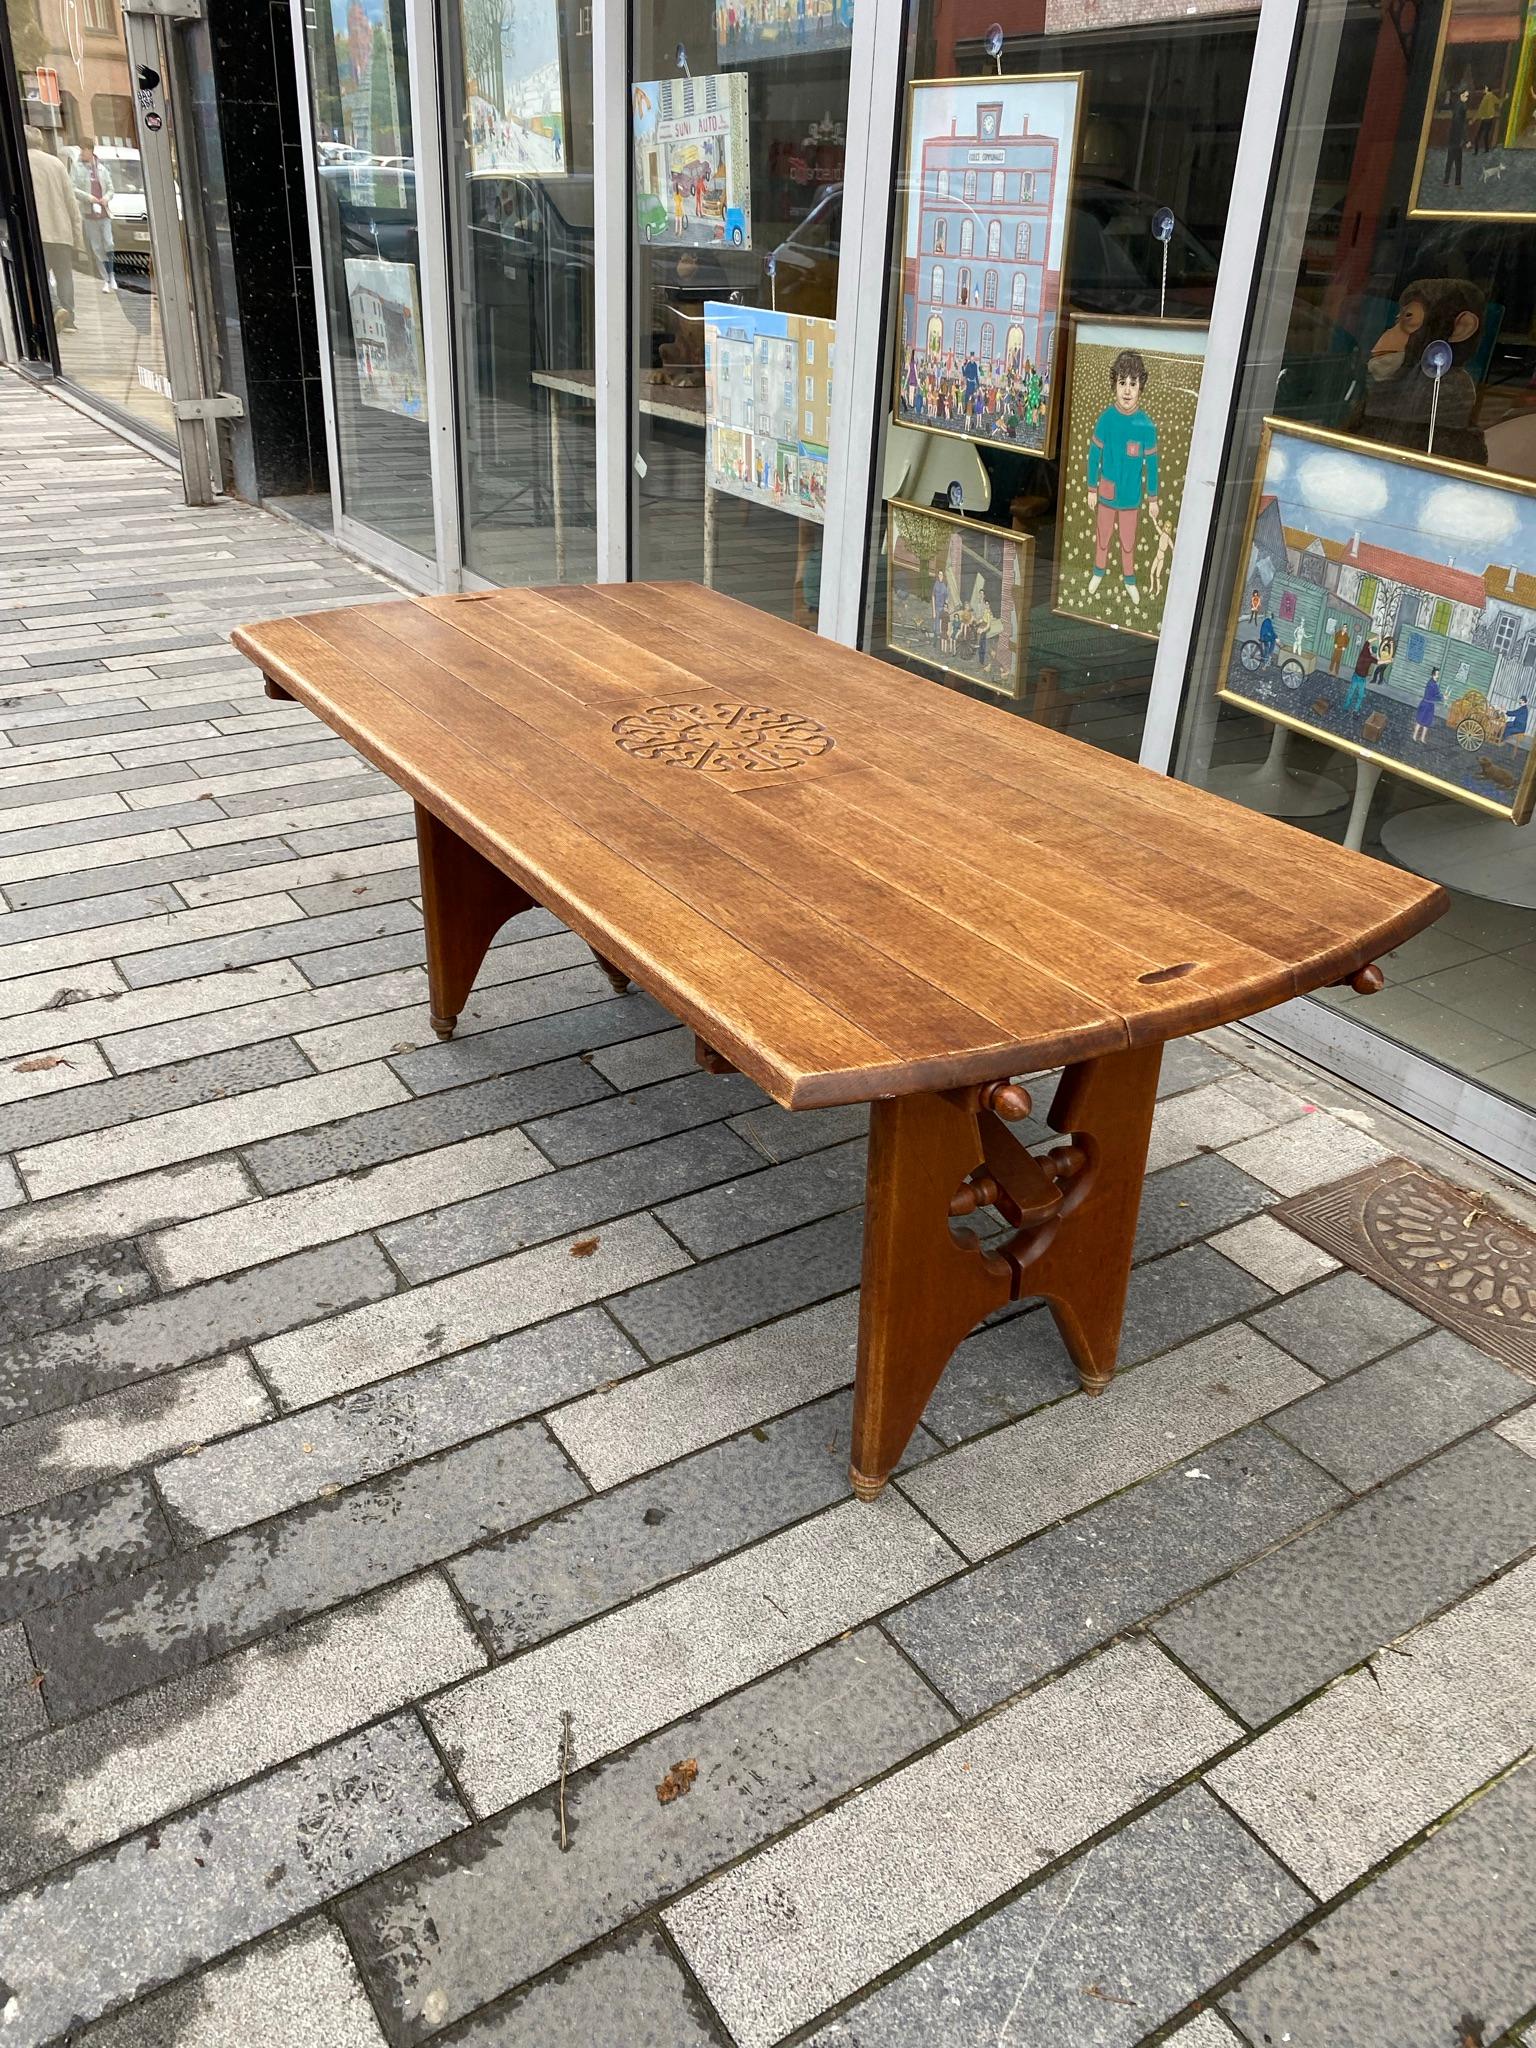 Guillerme et Chambron, oak table with 2 sliding drawers under the top,circa 1970
2 oak extensions extend the table up to 245 cm.
Dimension open: 73 x 245 x 85 cm.


 